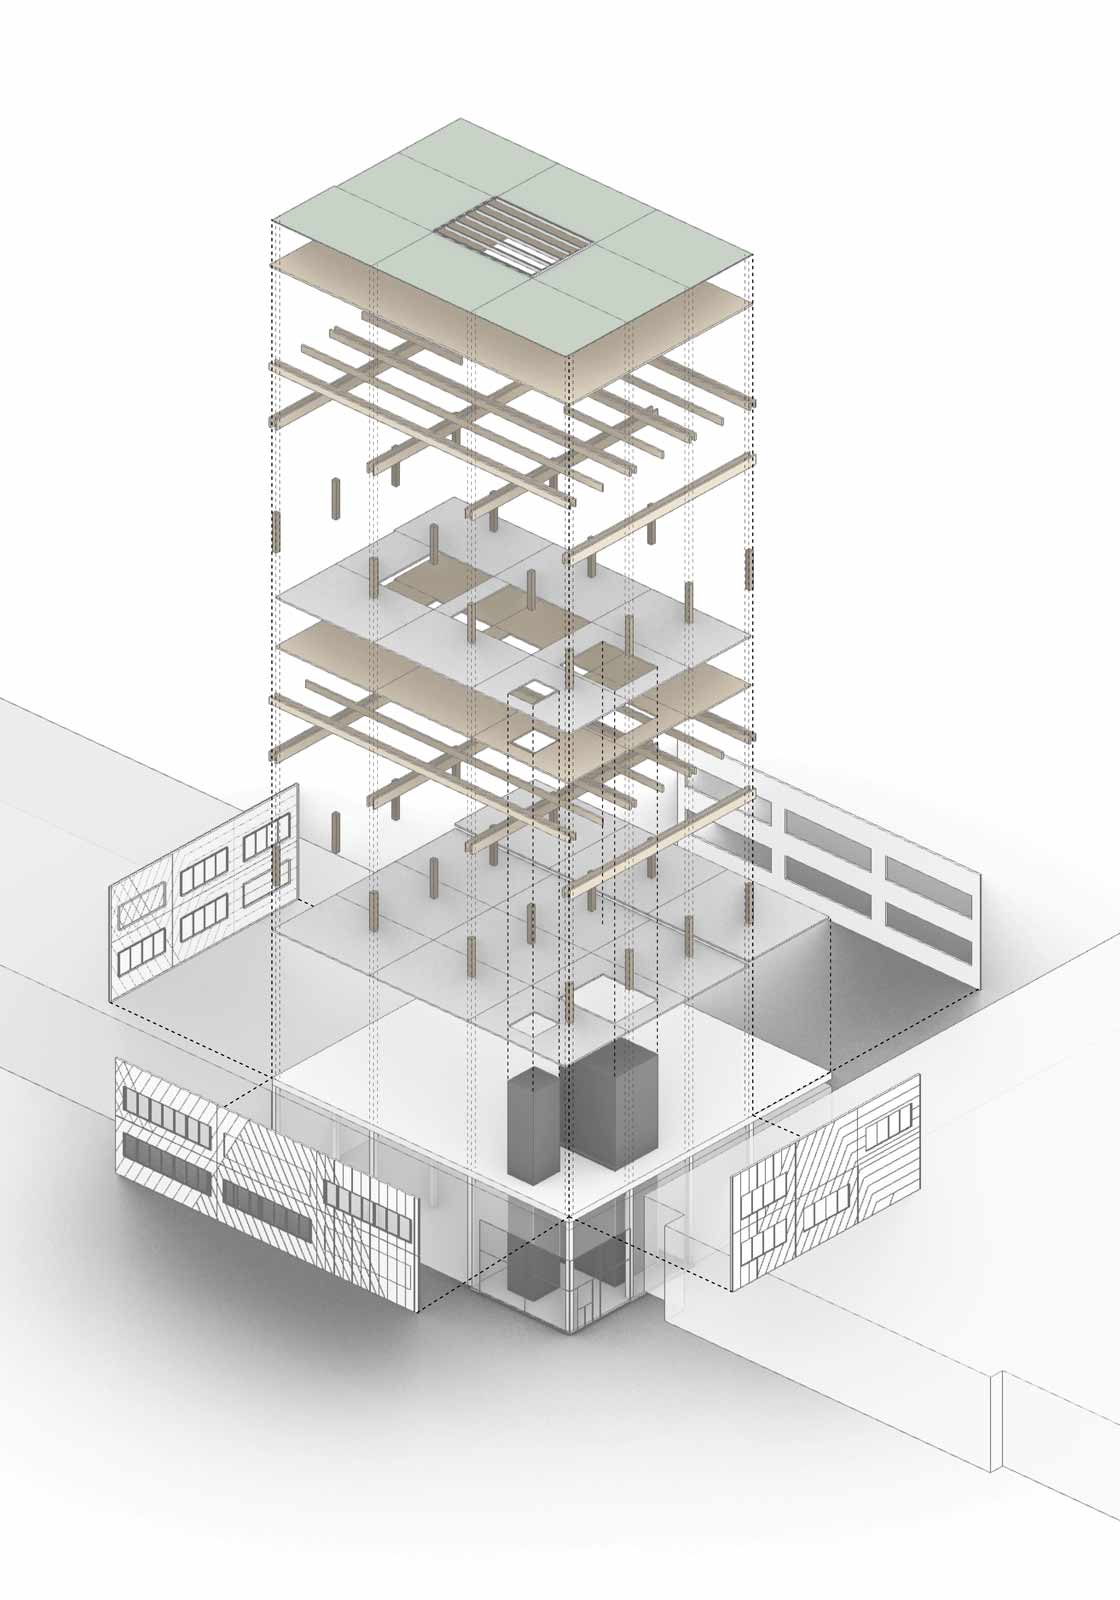 Designing the office building as a timber building. Pictogram: ATP